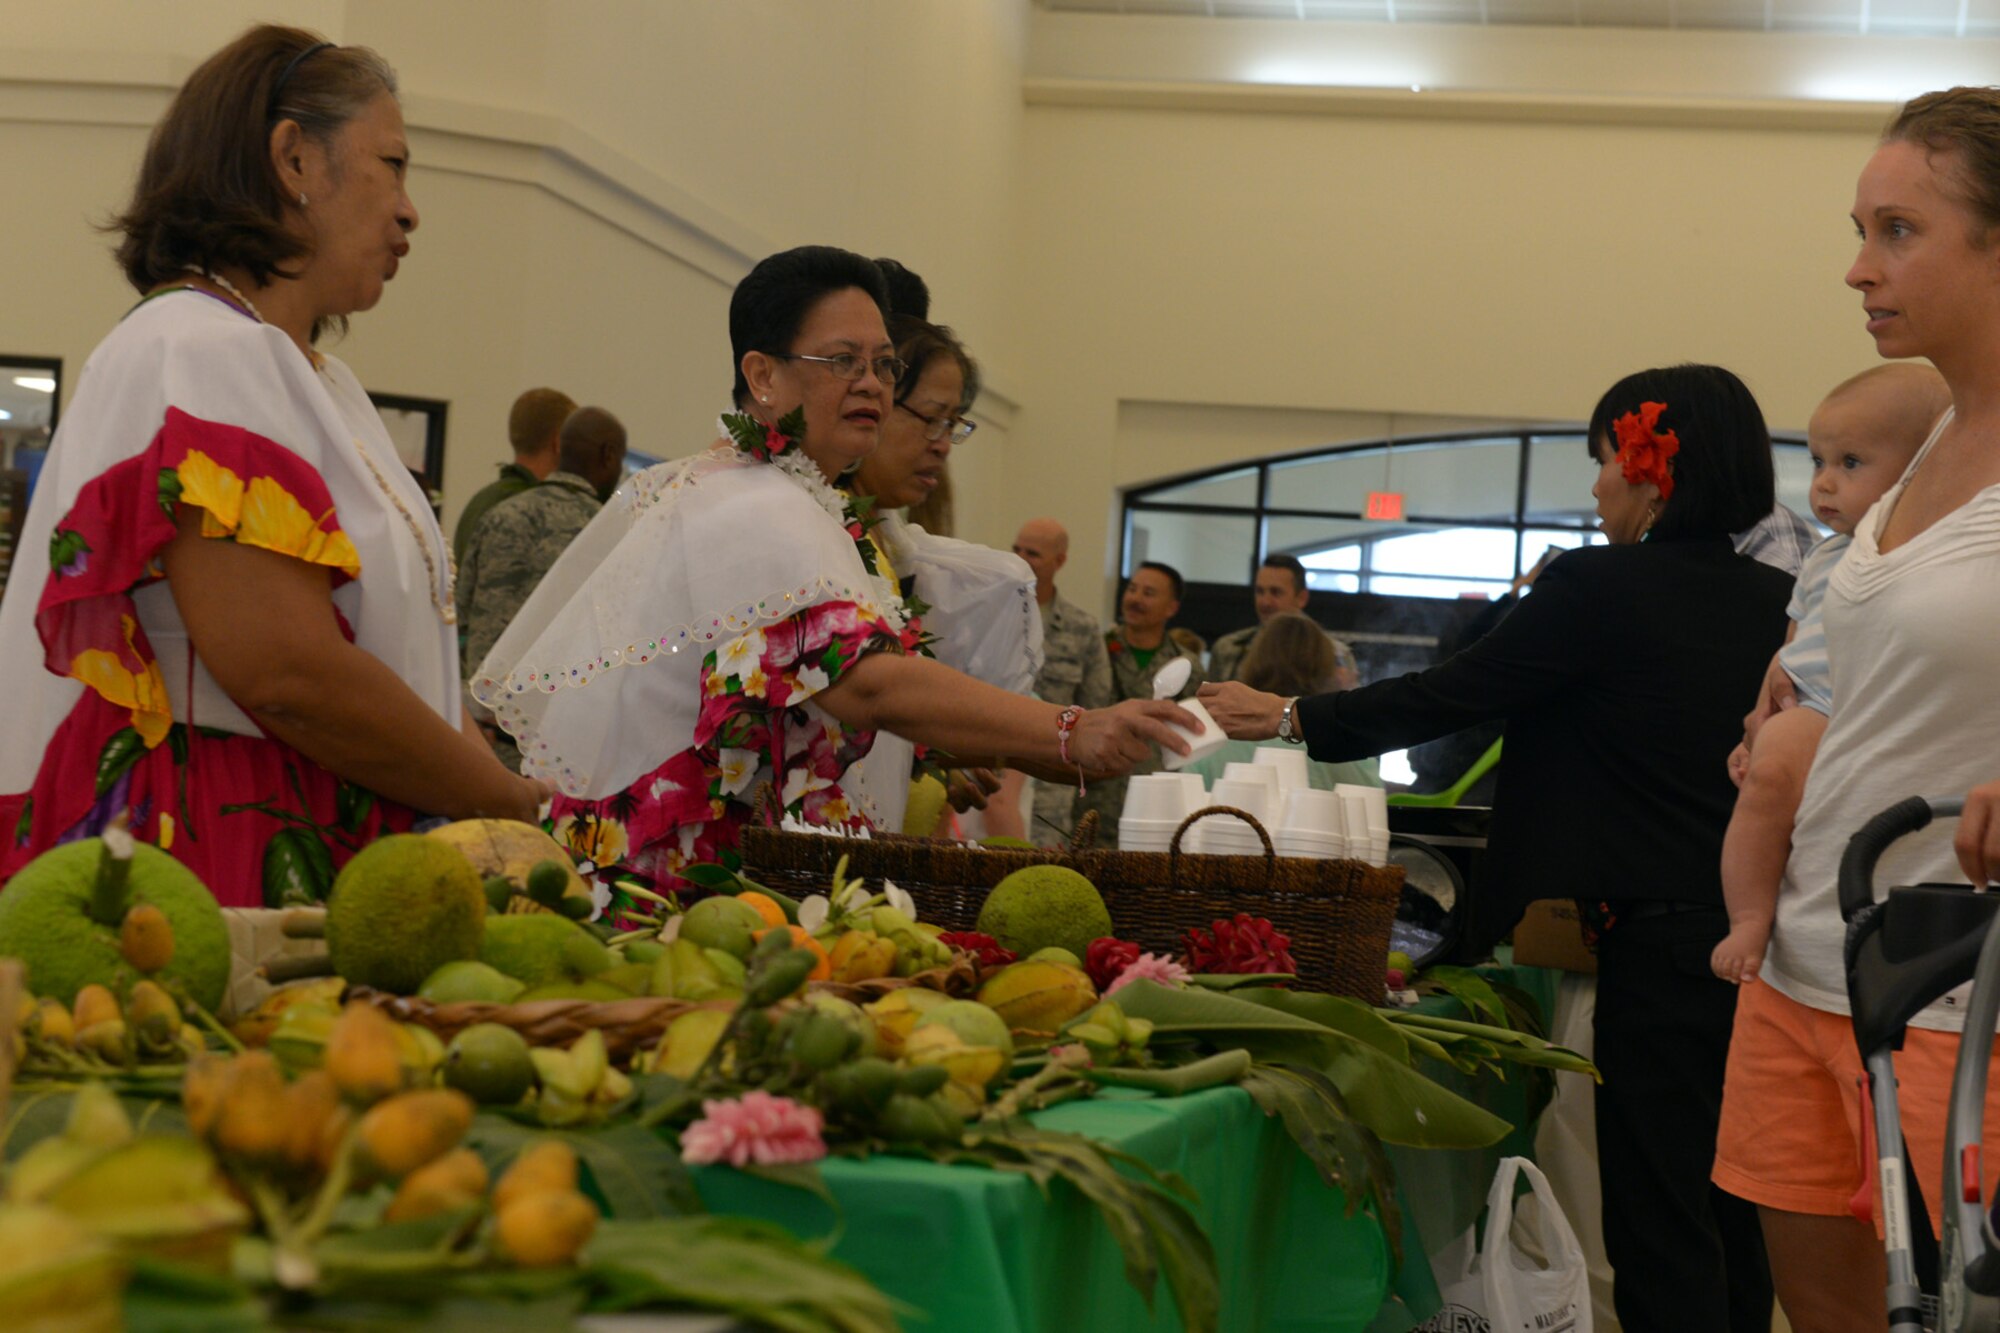 Team Andersen members are treated to local foods during a Chamorro Month presentation March 27, 2015, at Andersen Air Force Base, Guam. Team Andersen members observed different aspects of the Chomorro culture during the presentation. (U.S. Air Force photo by Airman 1st Class Joshua Smoot/Released)